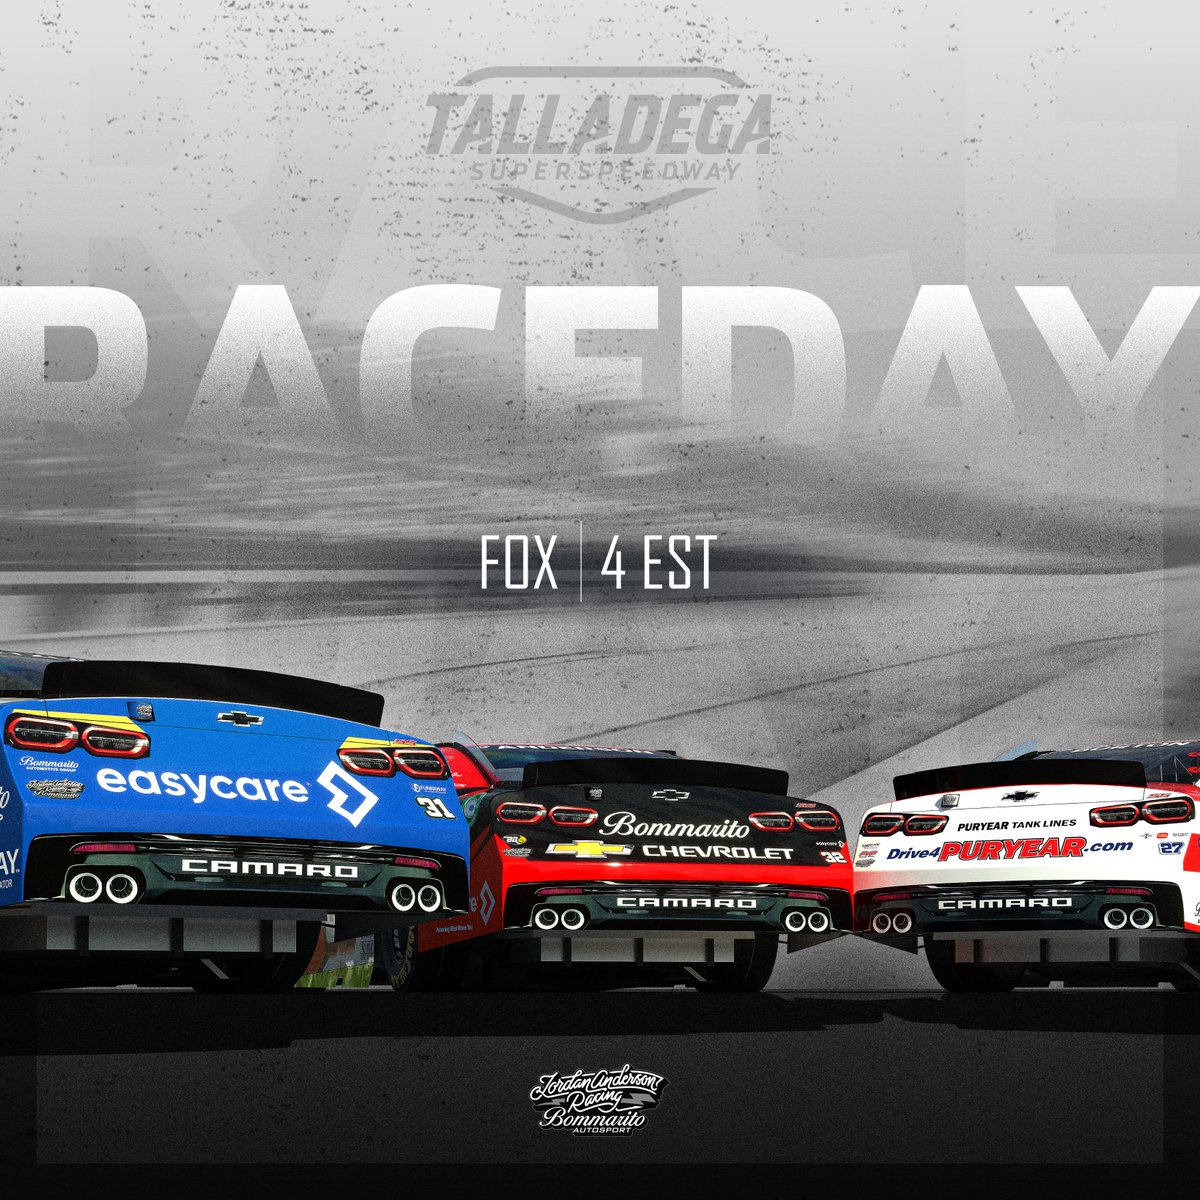 Get up it’s RACE DAY! We’re ready to take on Talladega this afternoon for 300 miles of high speed racing! @NASCARONFOX will have you covered at 4:00PM EST 📺 🏆 @EasyCareIsThere | @BommaritoAuto | @puryeartank @Parker79p | @j66anderson | @JebBurtonRacing